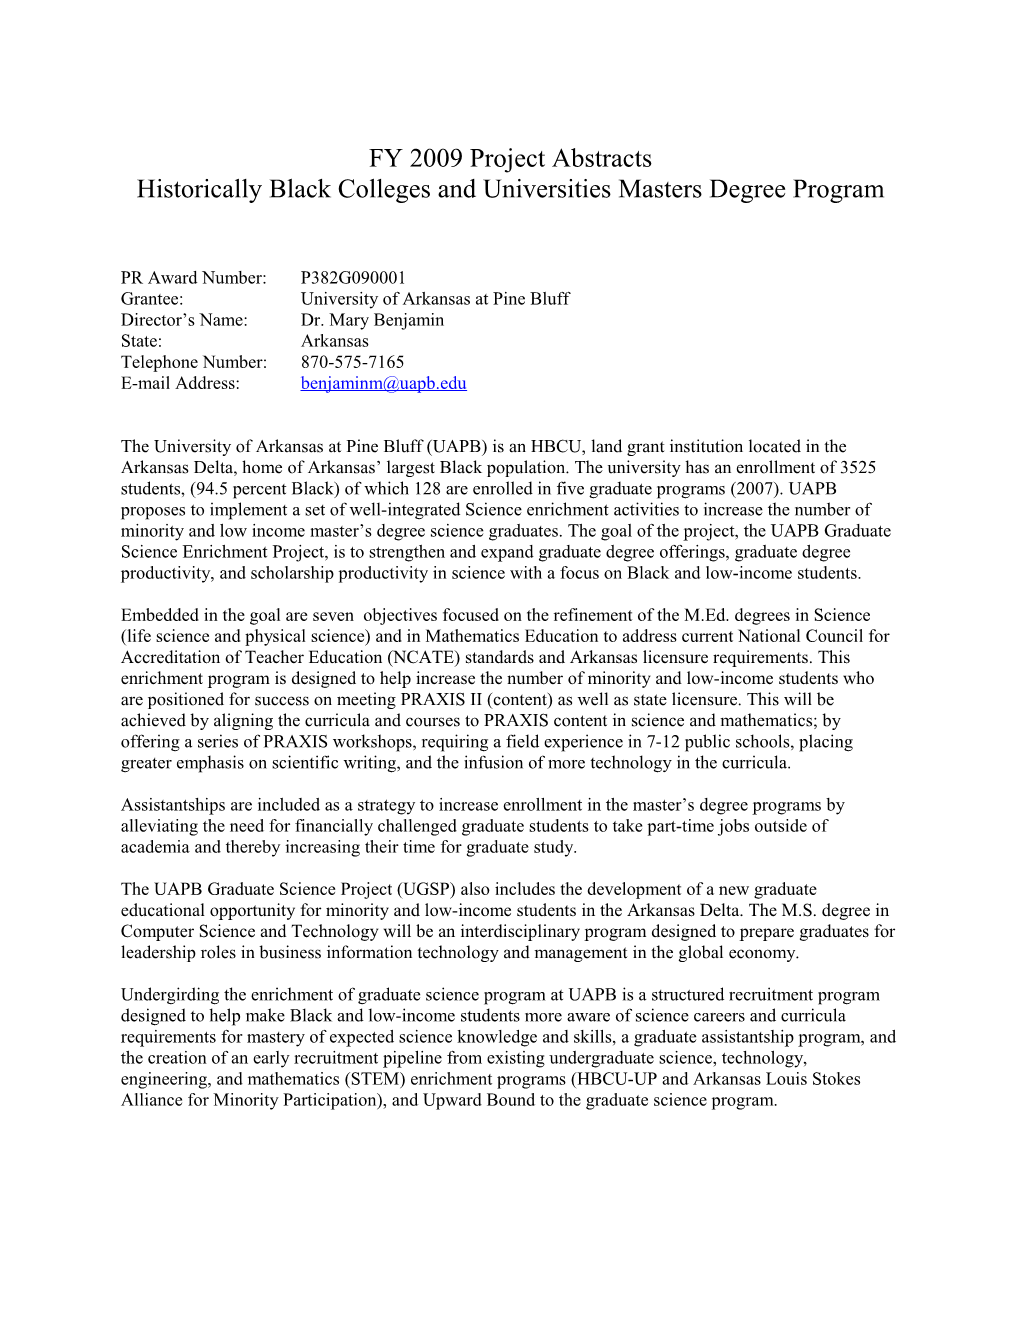 FY 2009 Project Abstracts for the Historically Black Colleges and Universities Masters